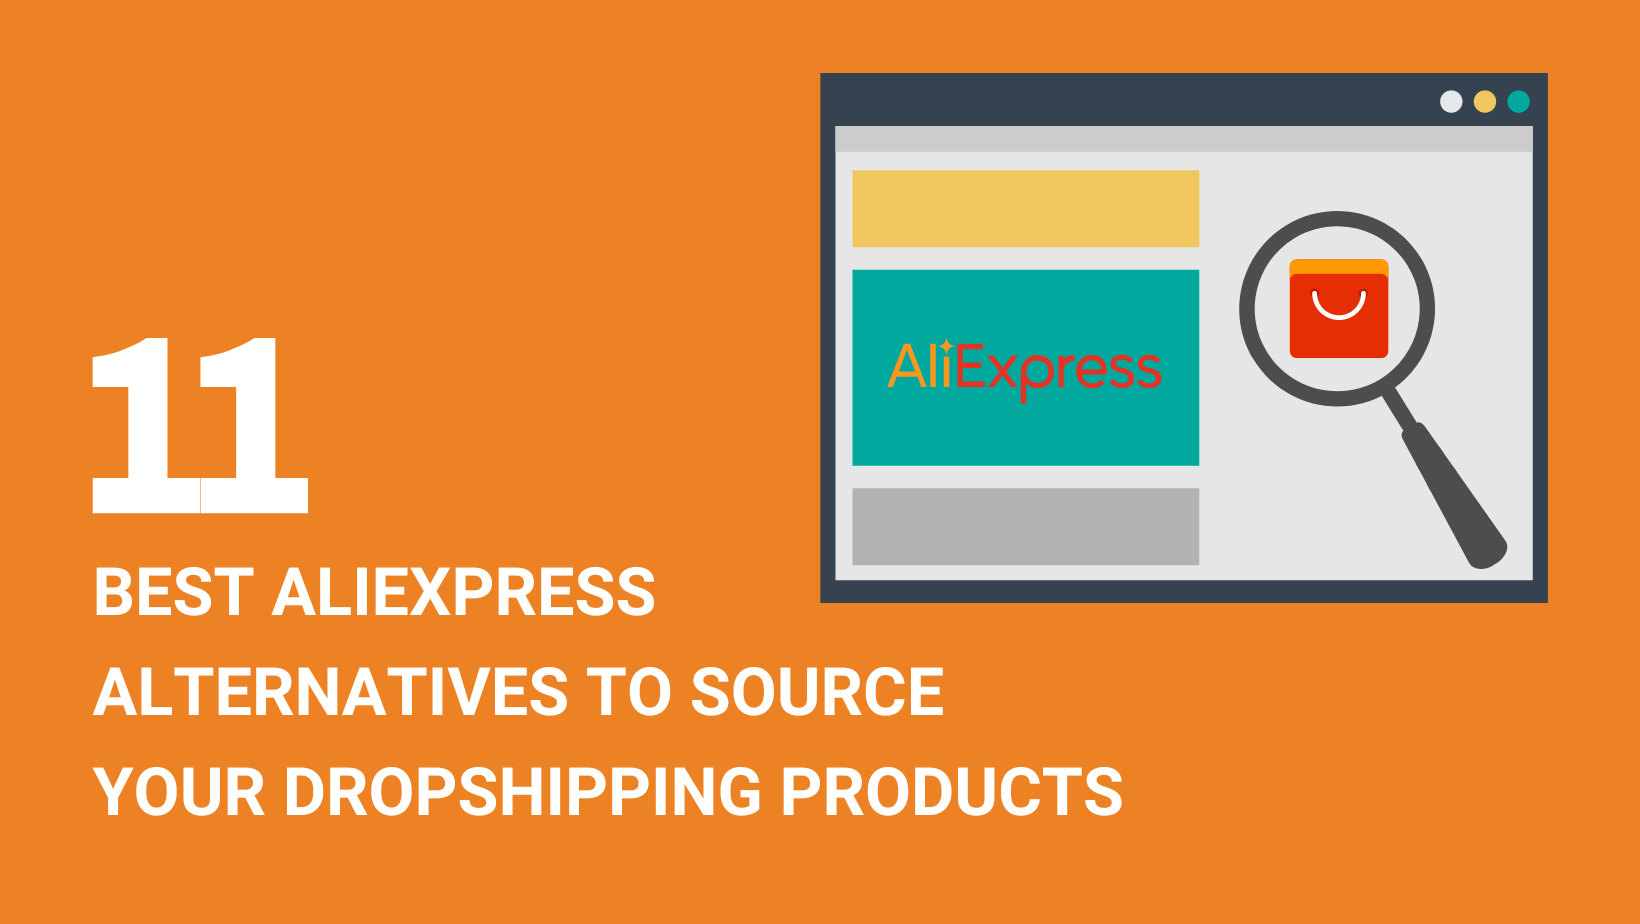 11 Best AliExpress Alternatives to Source Your Dropshipping Products -  Dropshipping From China | NicheDropshipping